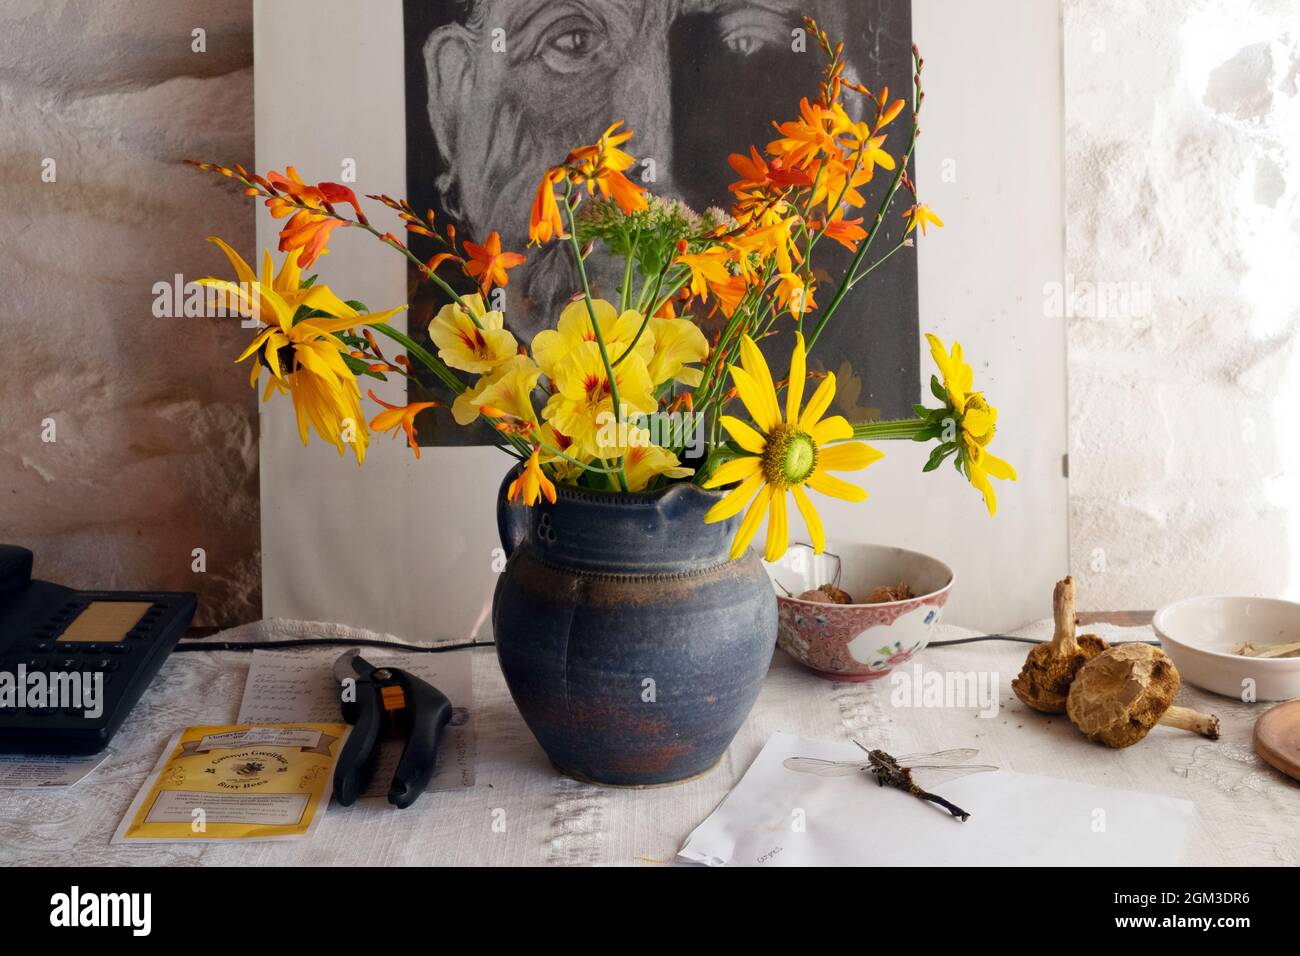 Yellow & orange cut flowers in a blue pottery vase on chest of drawers sideboard with picture secaturs dragonfly home house interior UK KATHY DEWITT Stock Photo